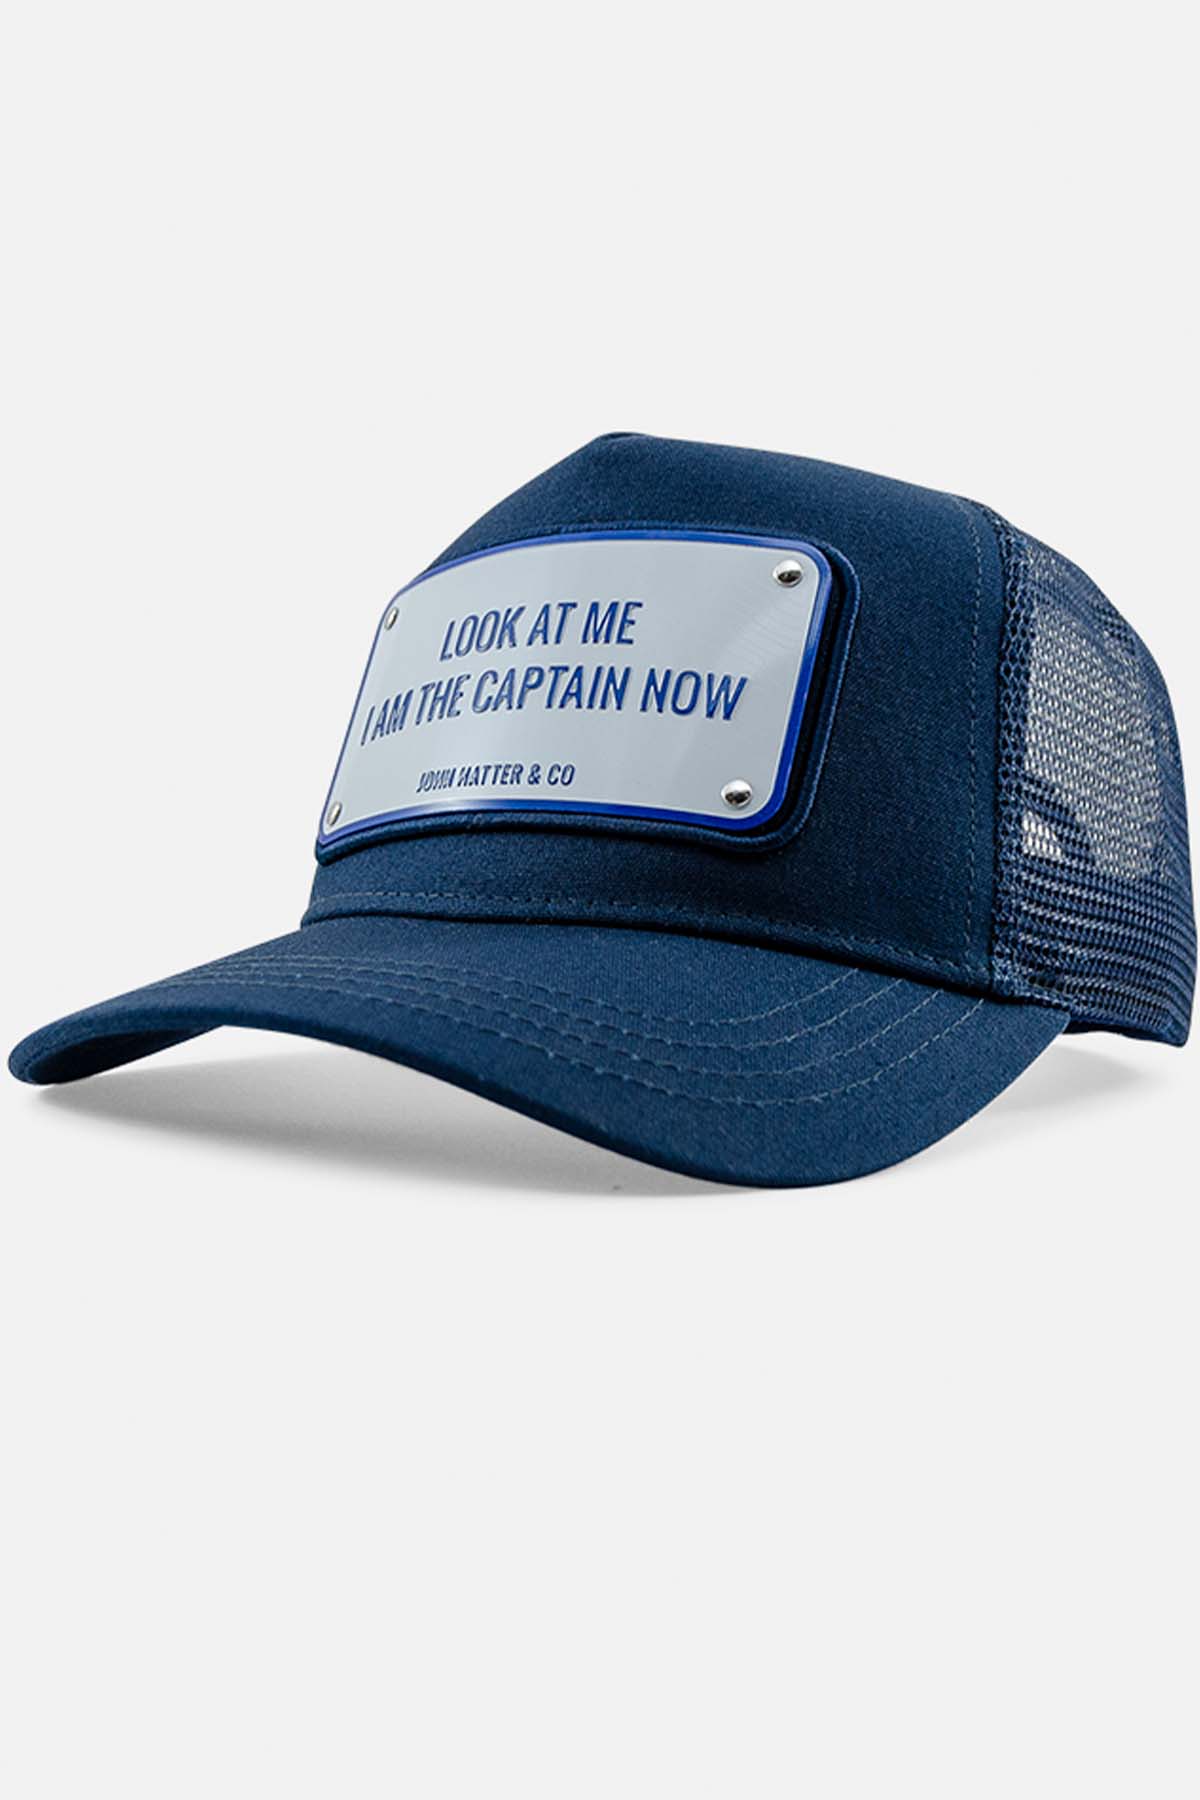 Look at me i am the captain now